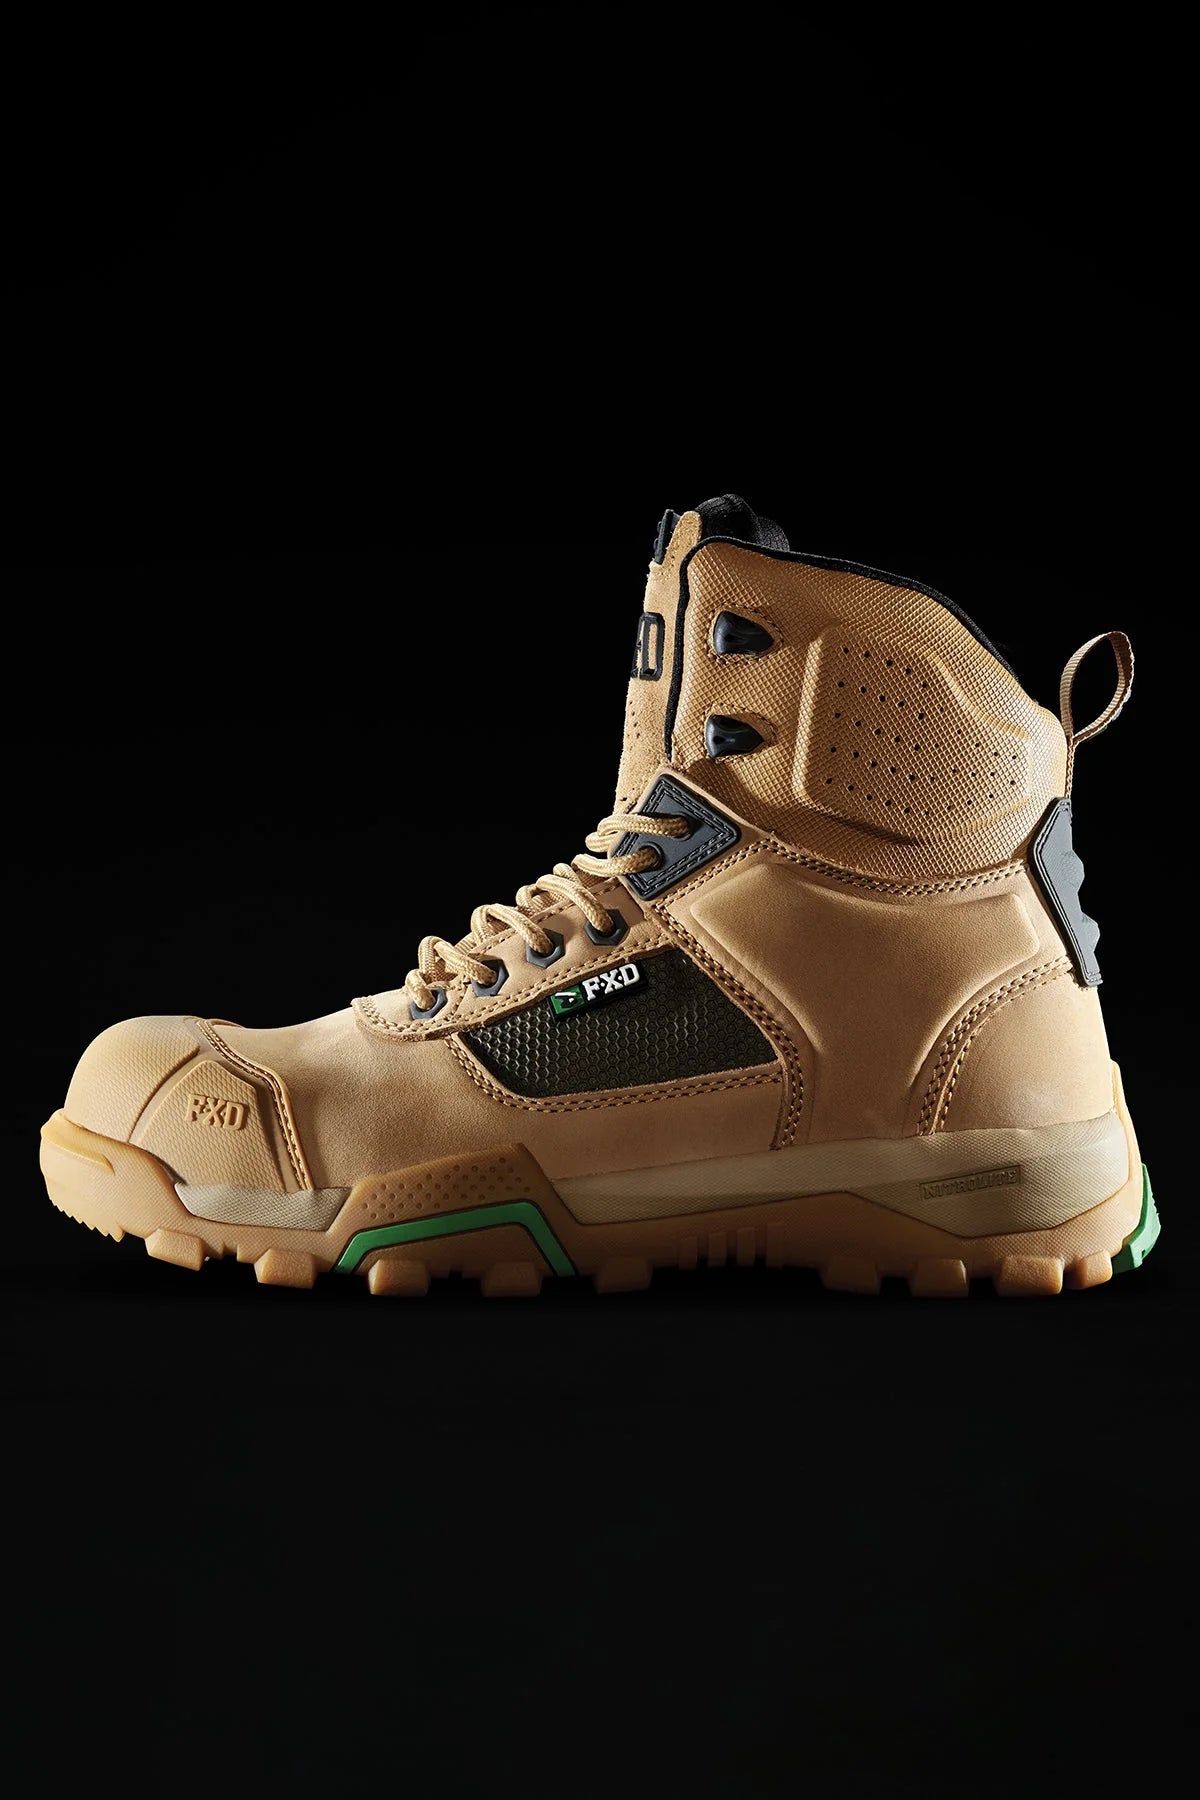 FXD WB.1  WORK BOOTS IN WHEAT US MEN'S SHOES SIZE